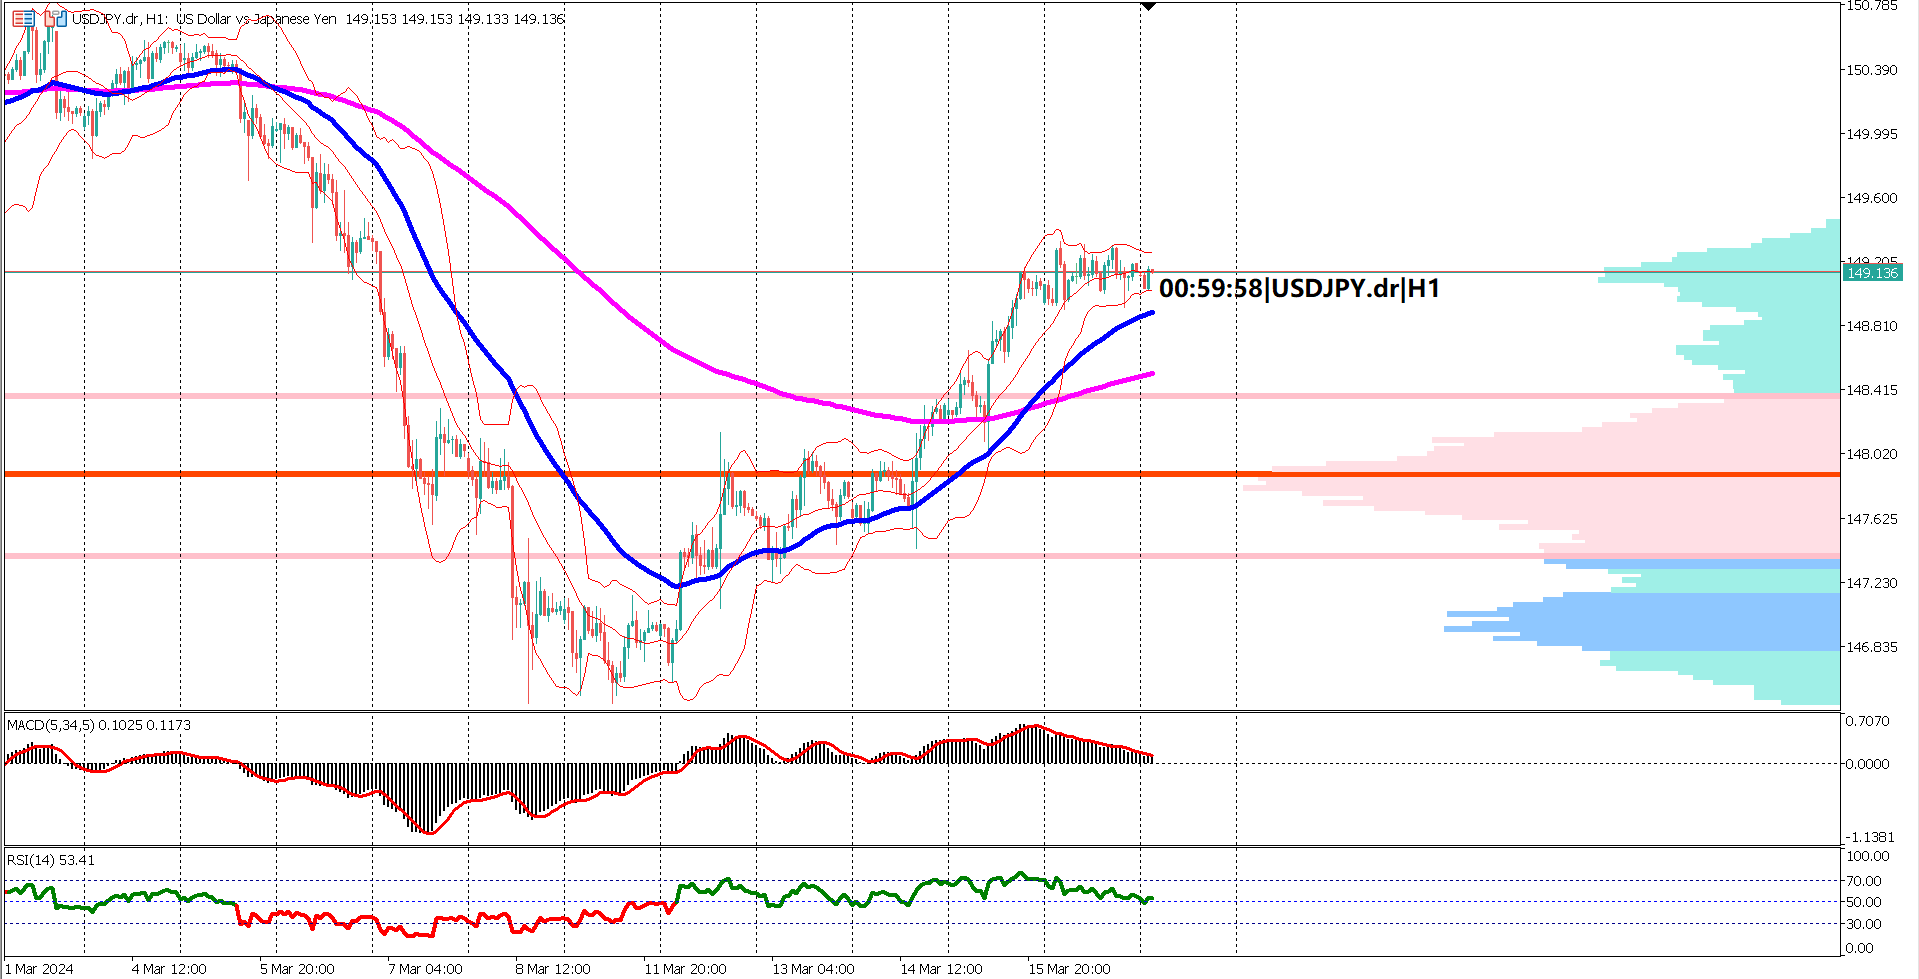 USDJPY: Market Anticipation Builds as BoJ Prepares for Policy Announcementlog Post Title Here...